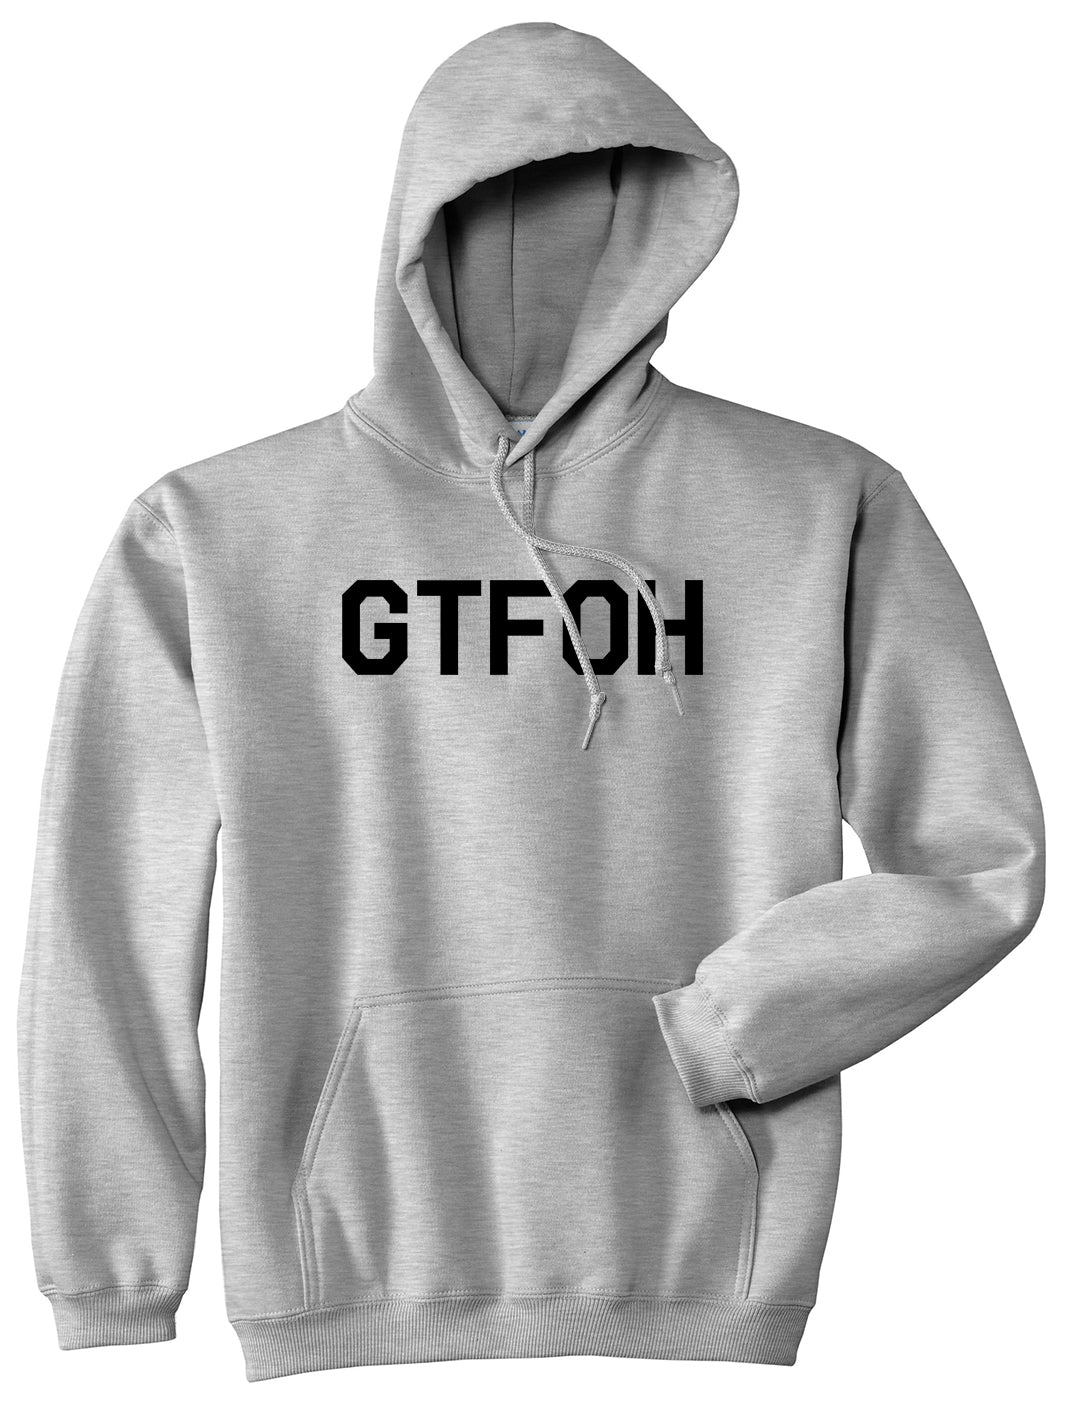 GTFOH Grey Pullover Hoodie by Kings Of NY